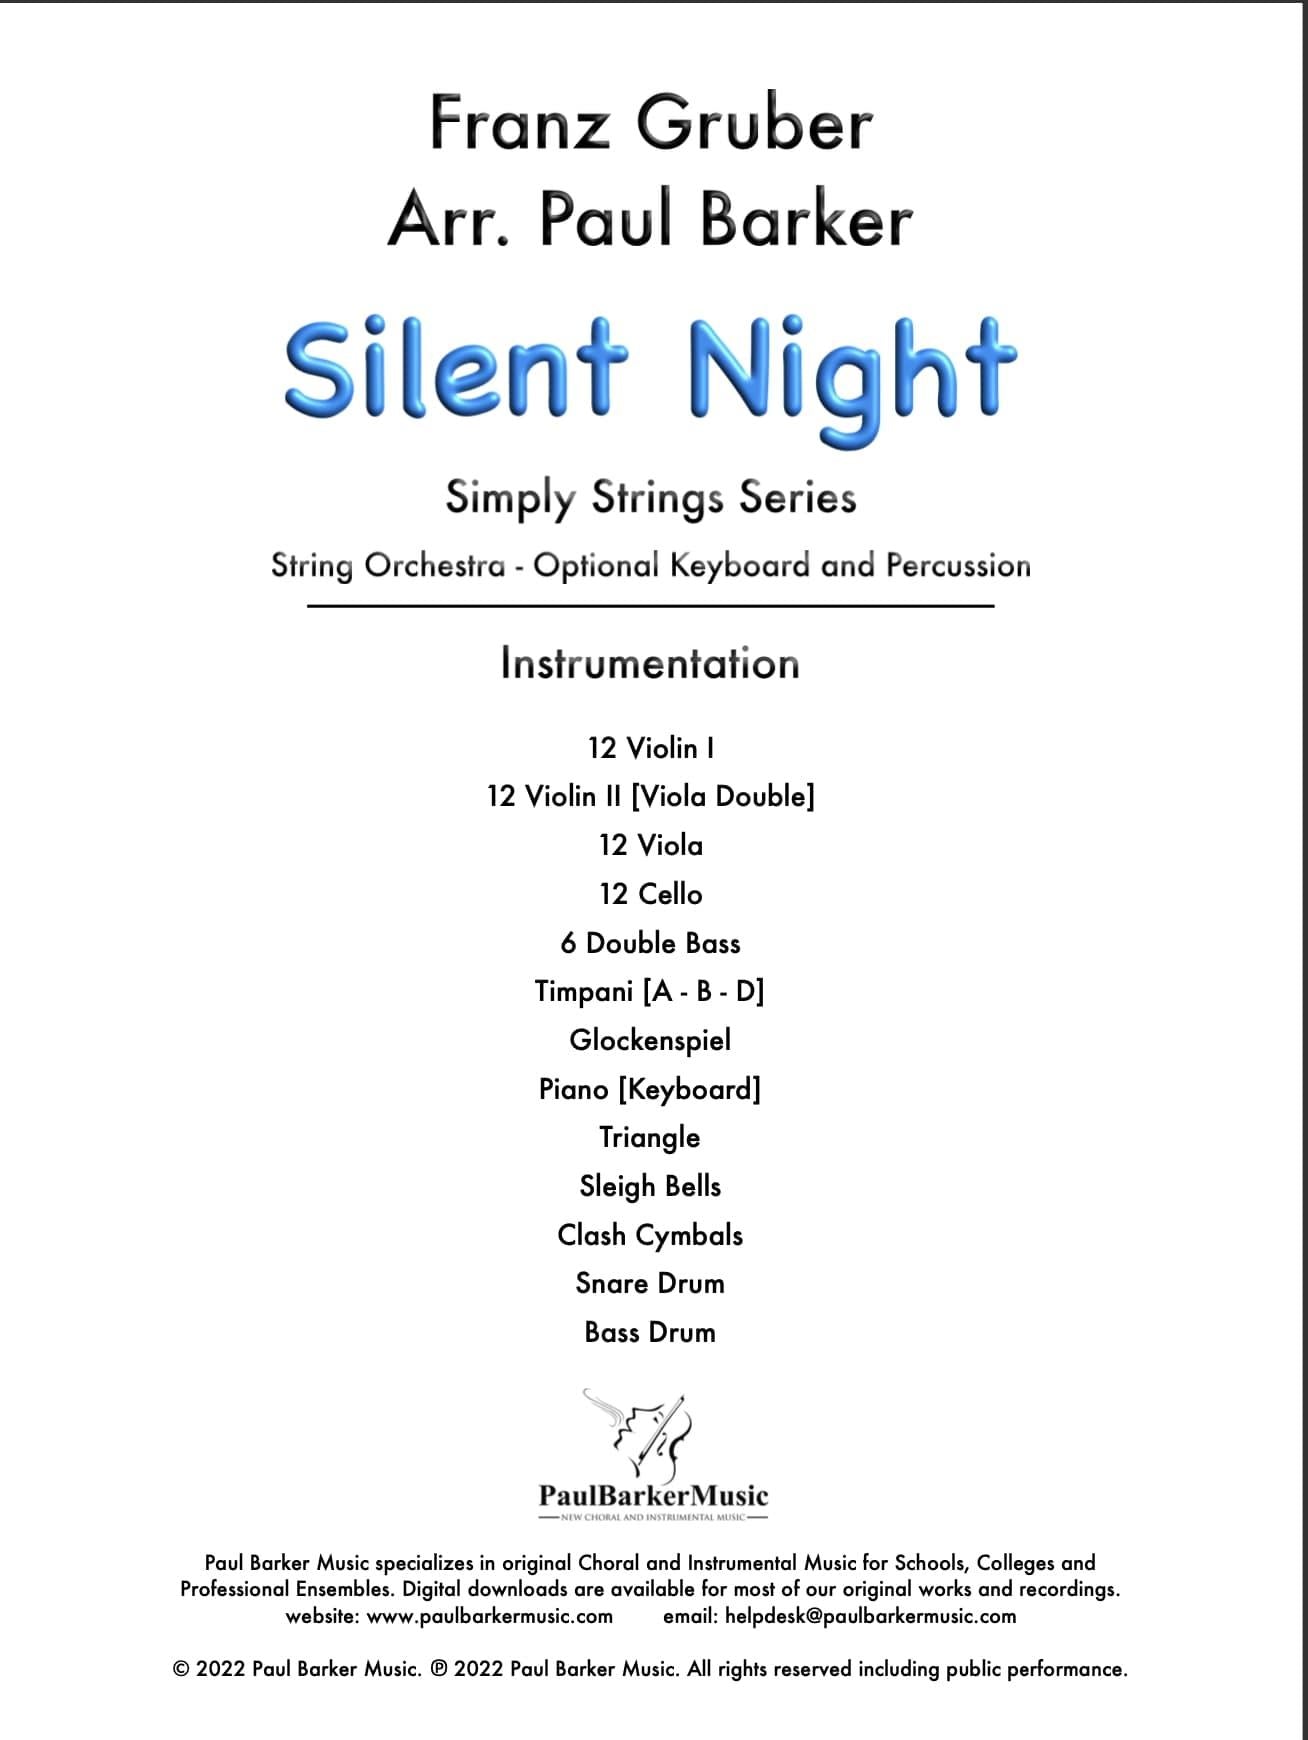 Simply Strings Series - Christmas Collection 2 - Paul Barker Music 